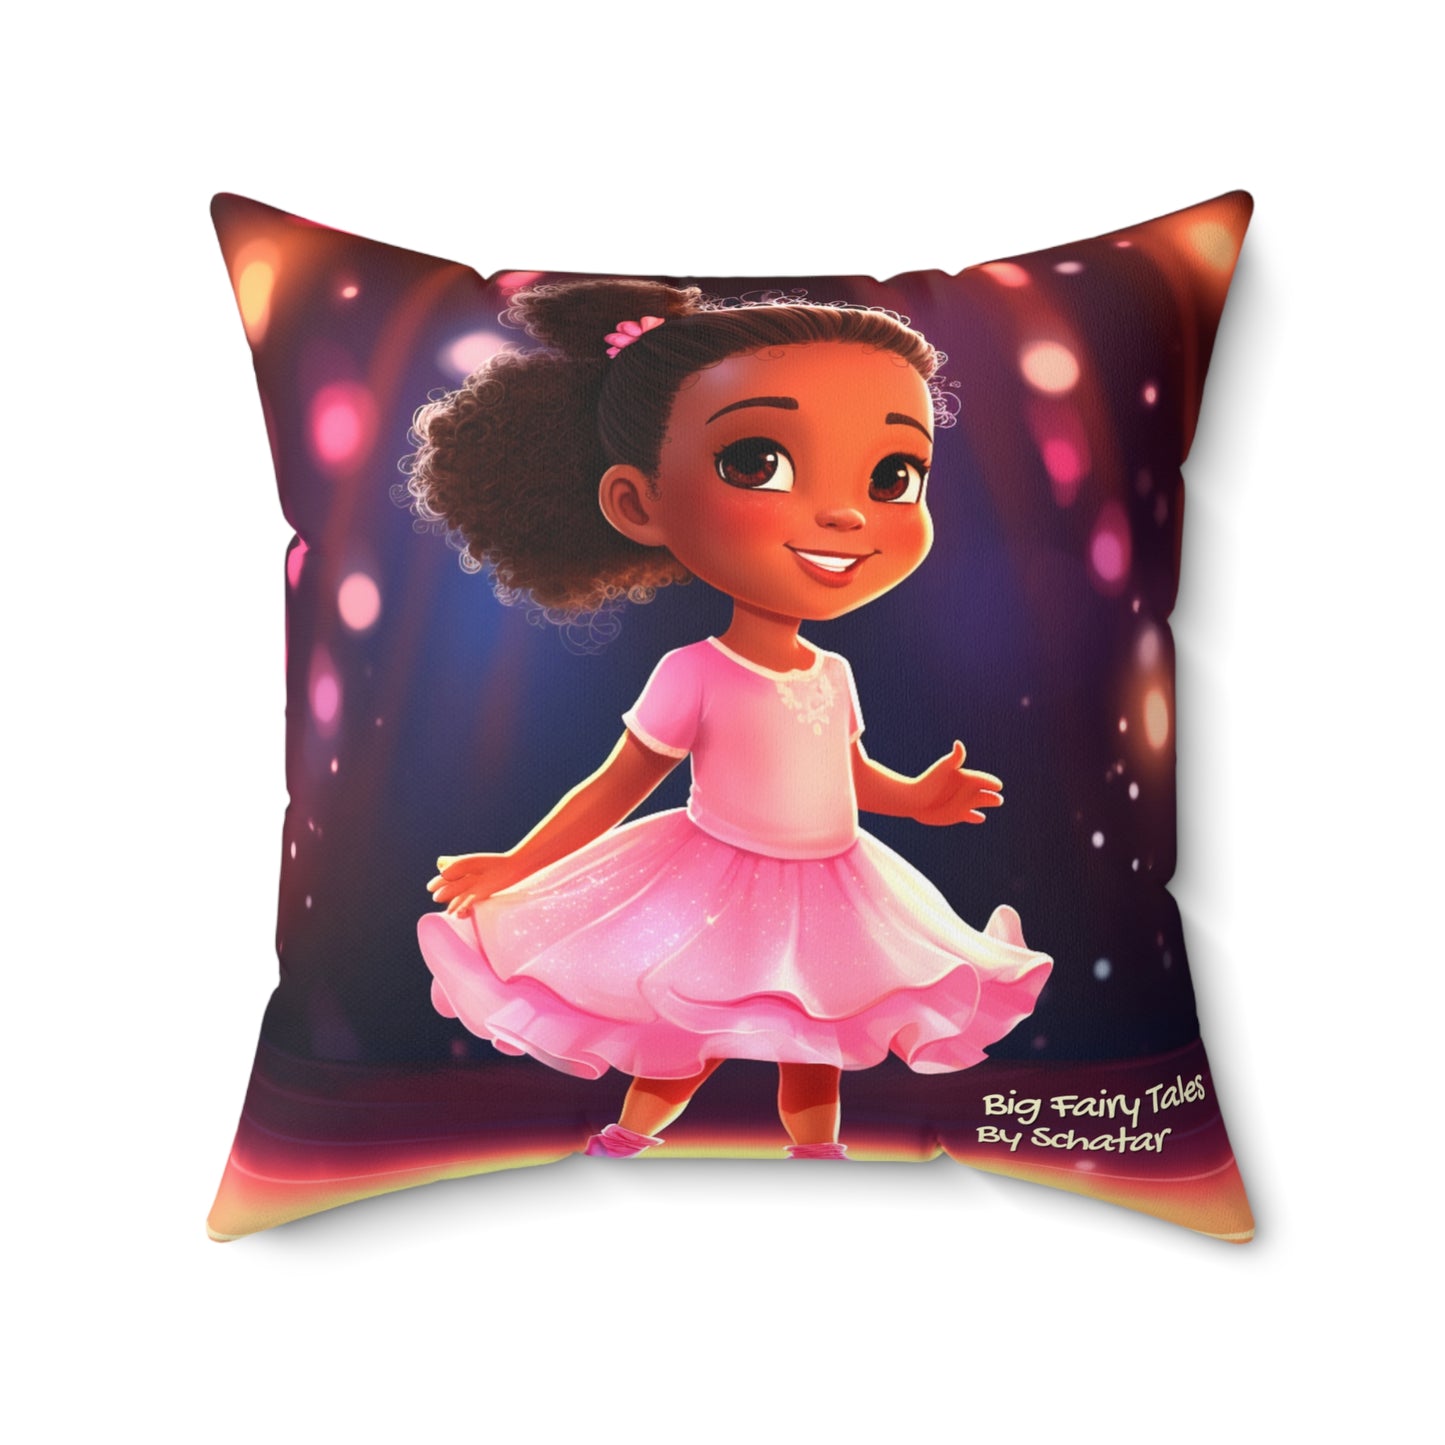 Prima Ballerina - Big Little Professionals Plush Pillow 3 From Big Fairy Tales By Schatar